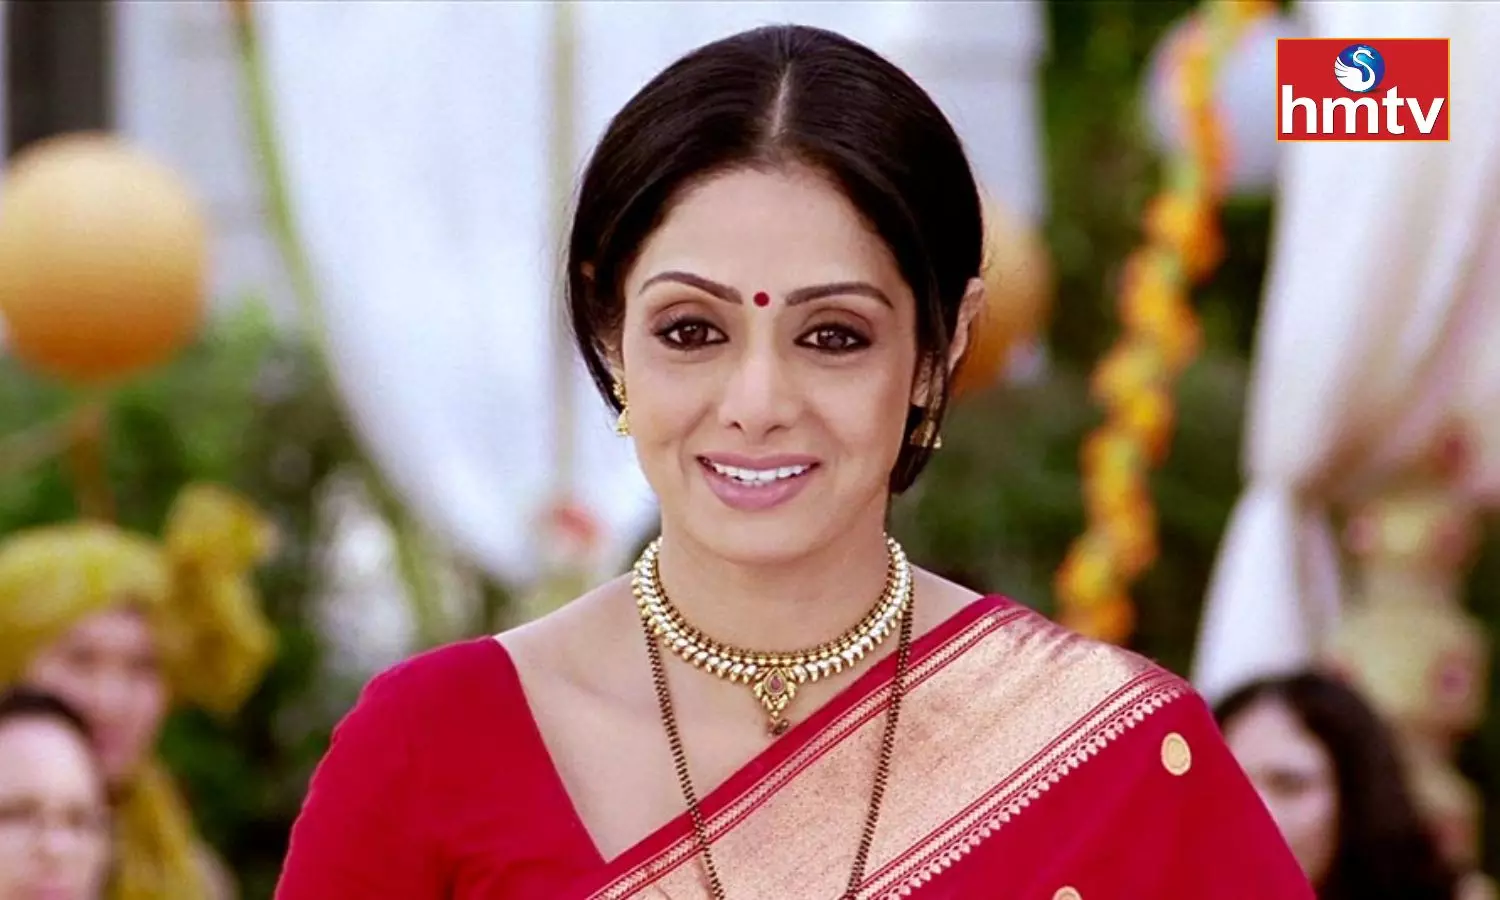 Sridevi’s Sarees From English Vinglish to be Auctioned to Mark Film’s 10th Anniversary